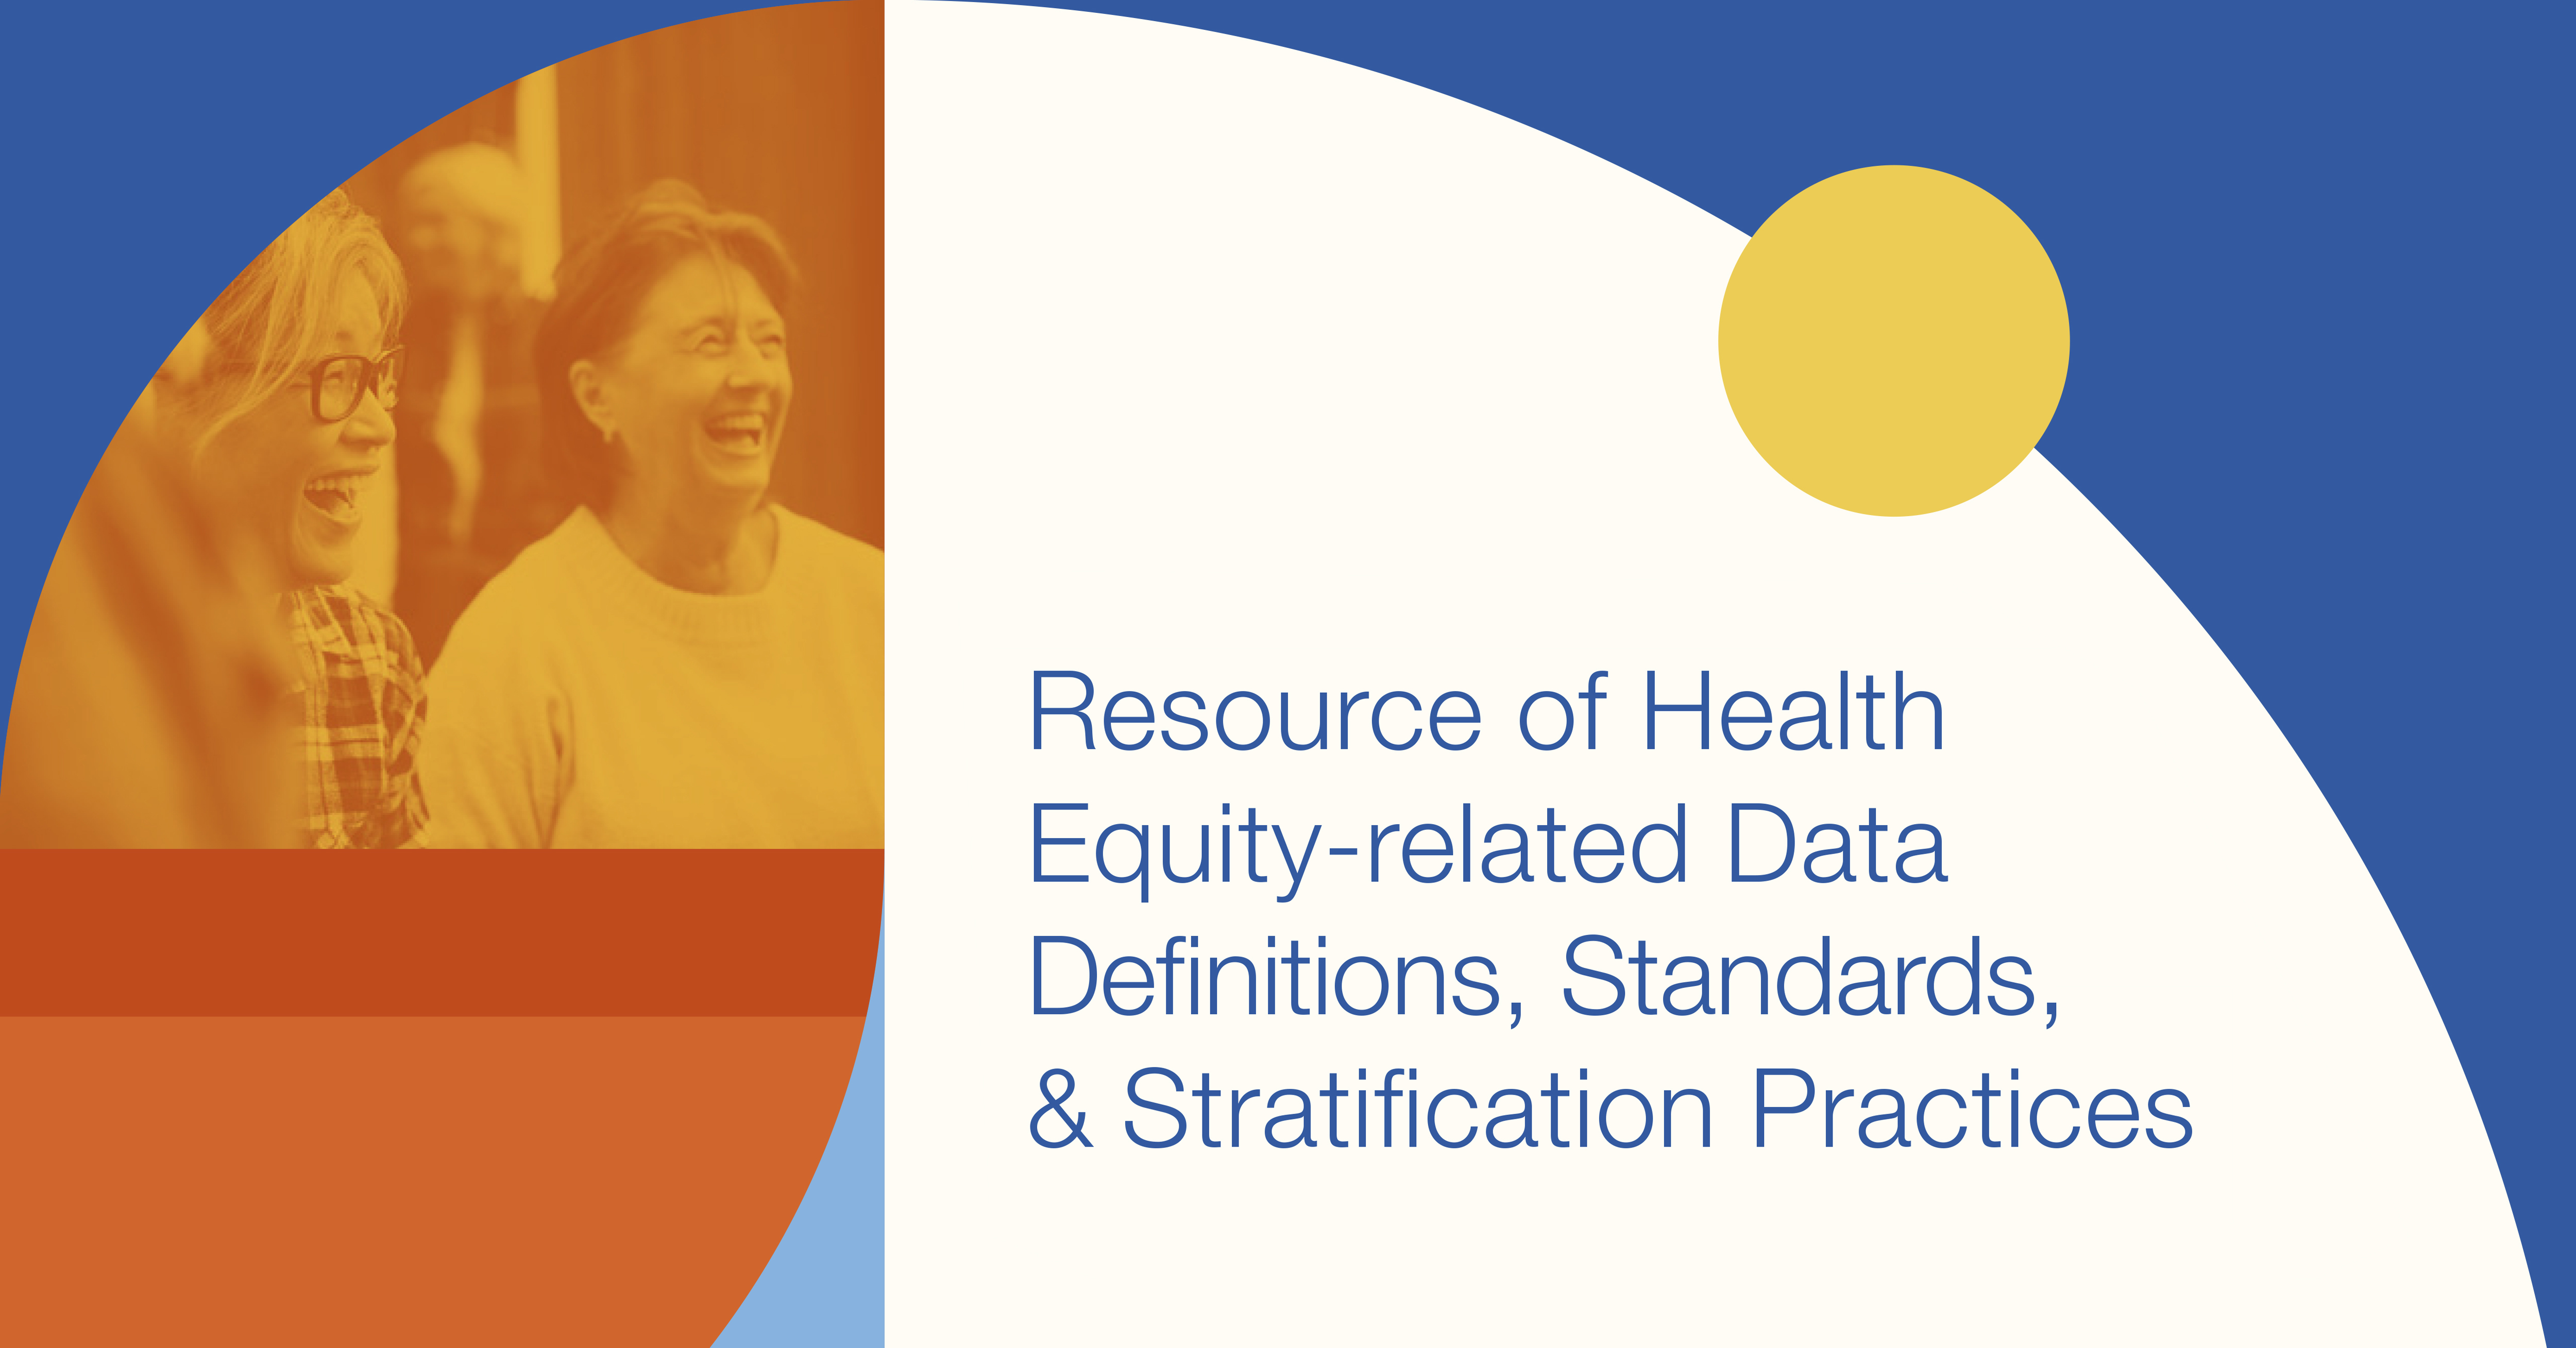 Graphic that says "Resource of Health Equity-related Data Definitions, Standards & Stratification Practices" with an orange tint overlaying two smiling/laughing women